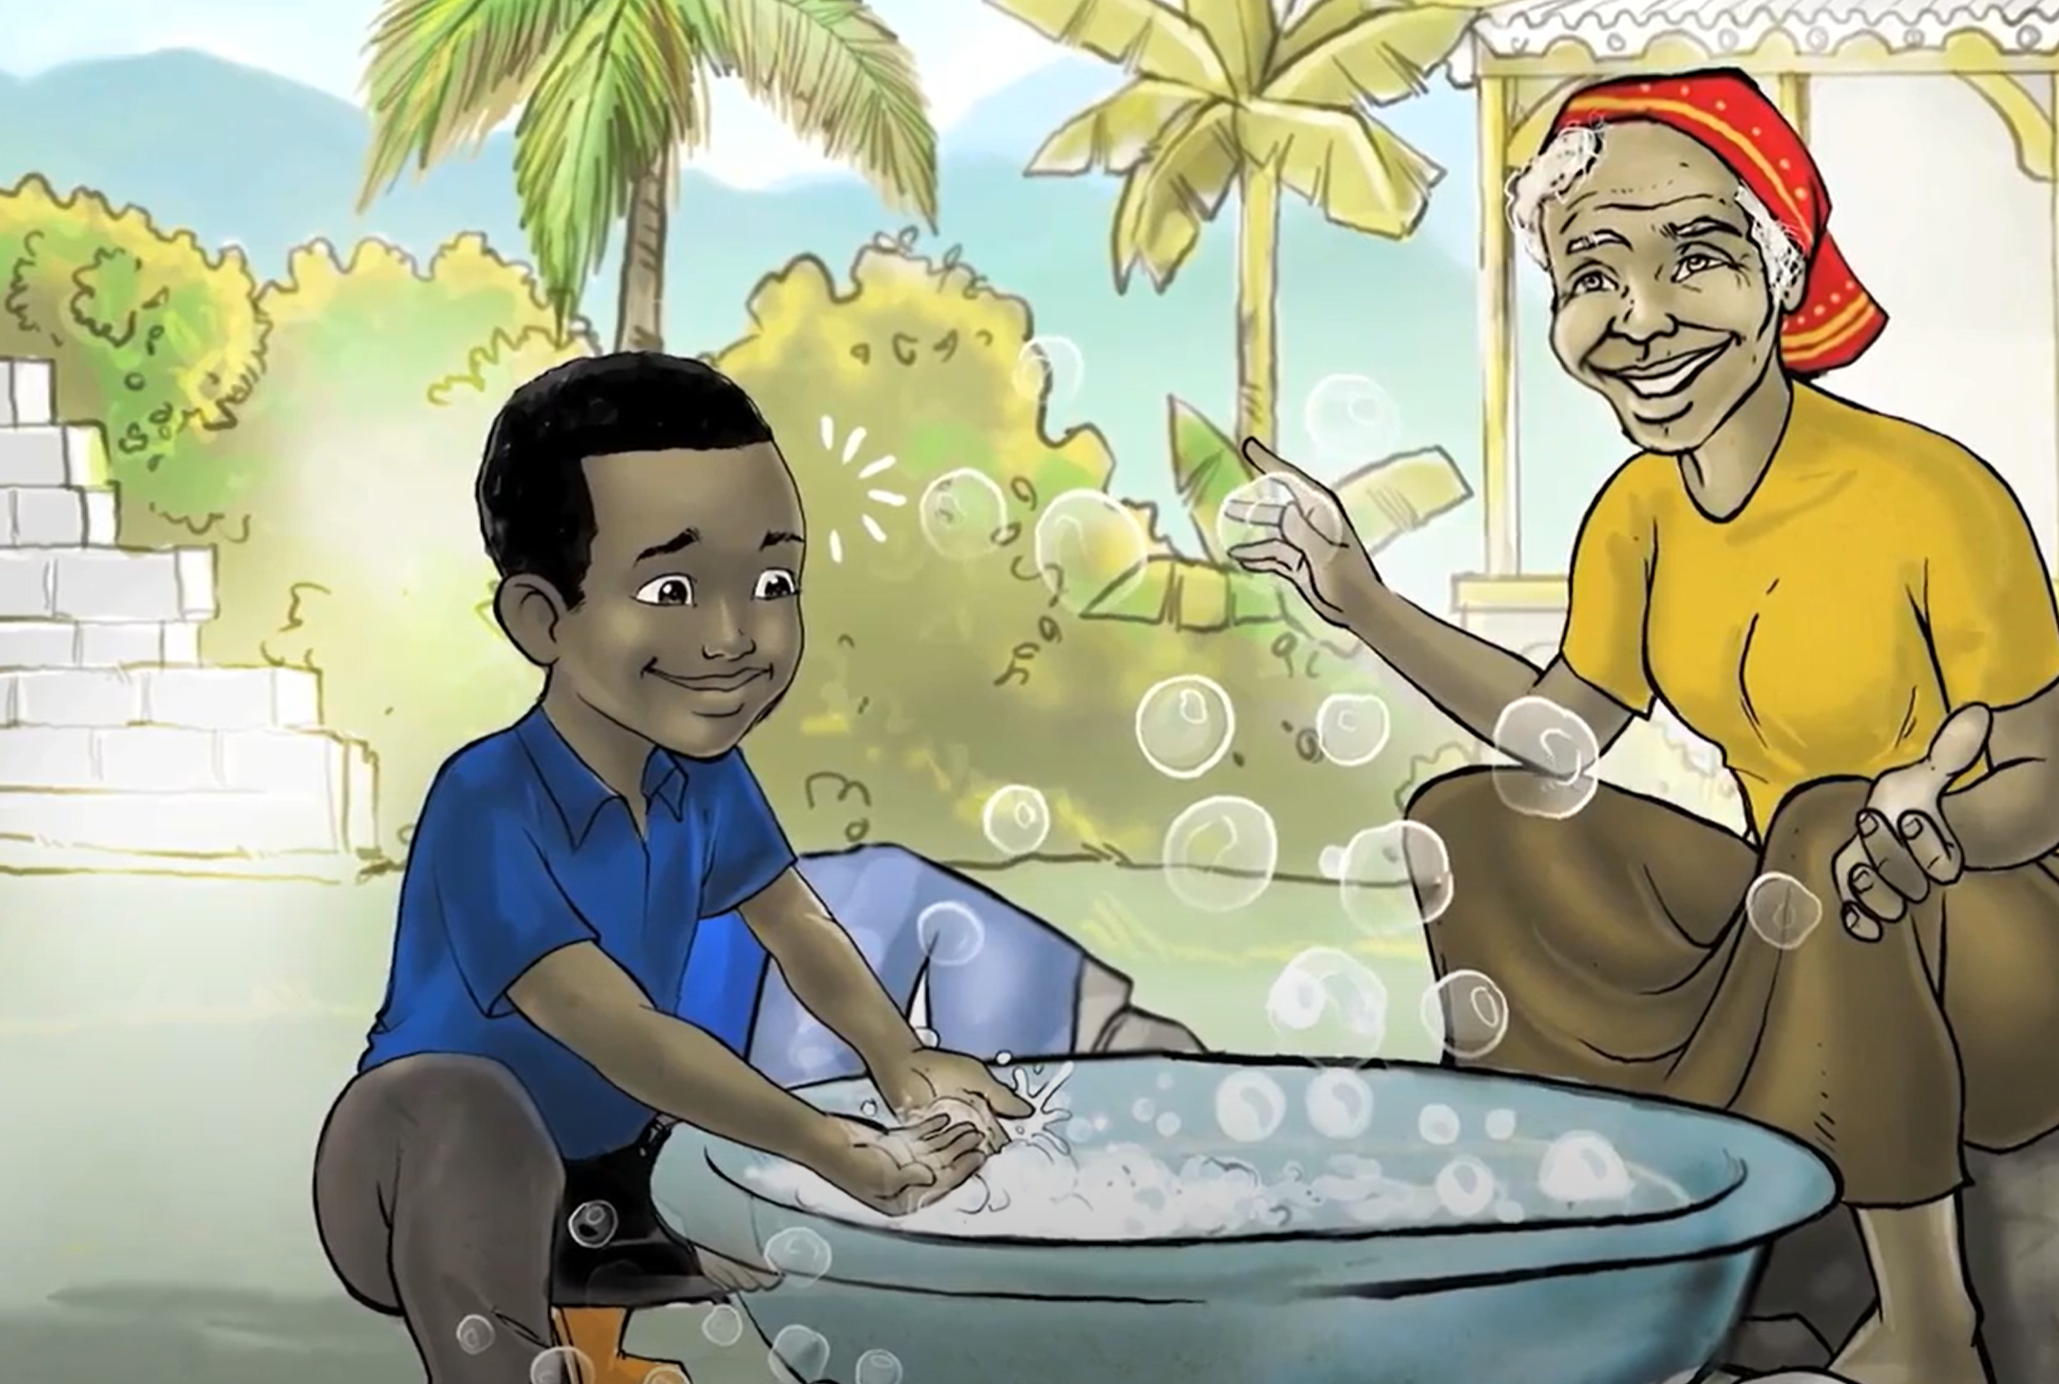 Illustration of young boy doing laundry with his grandmother